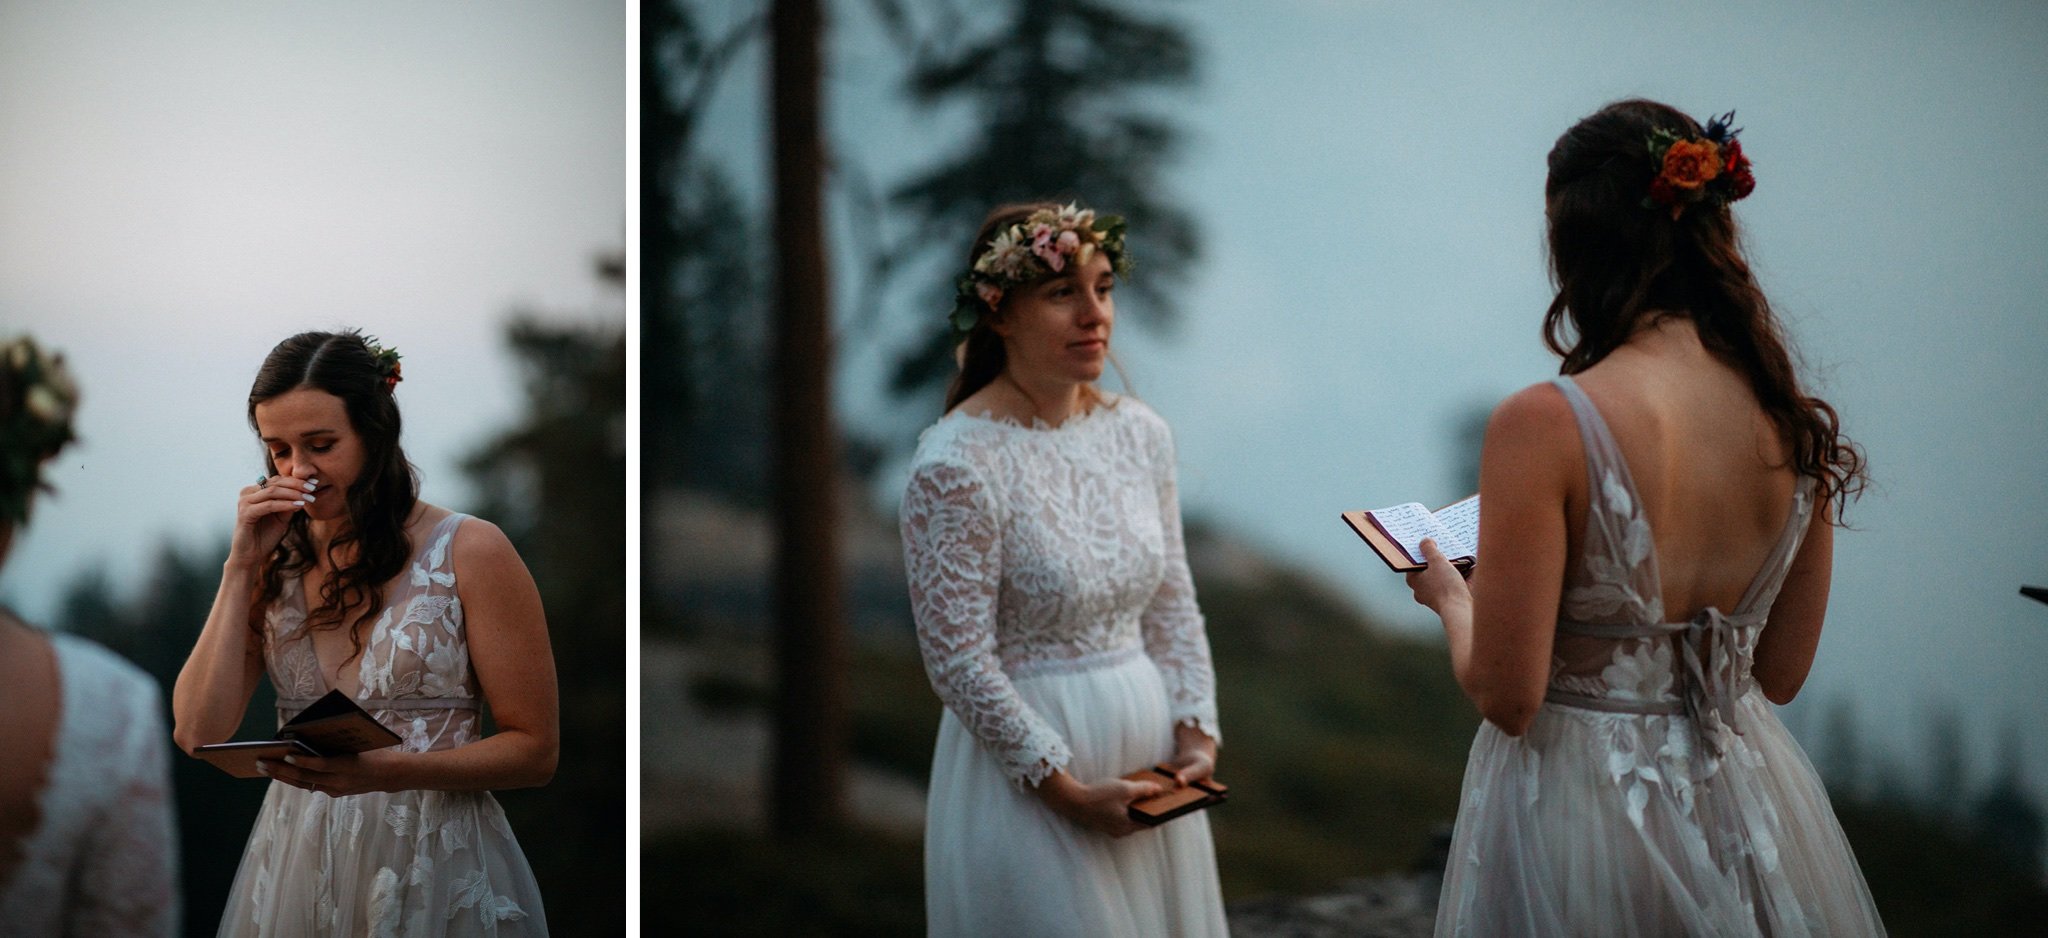 Yosemite National Park Elopement with Two Brides-Will Khoury63.jpg